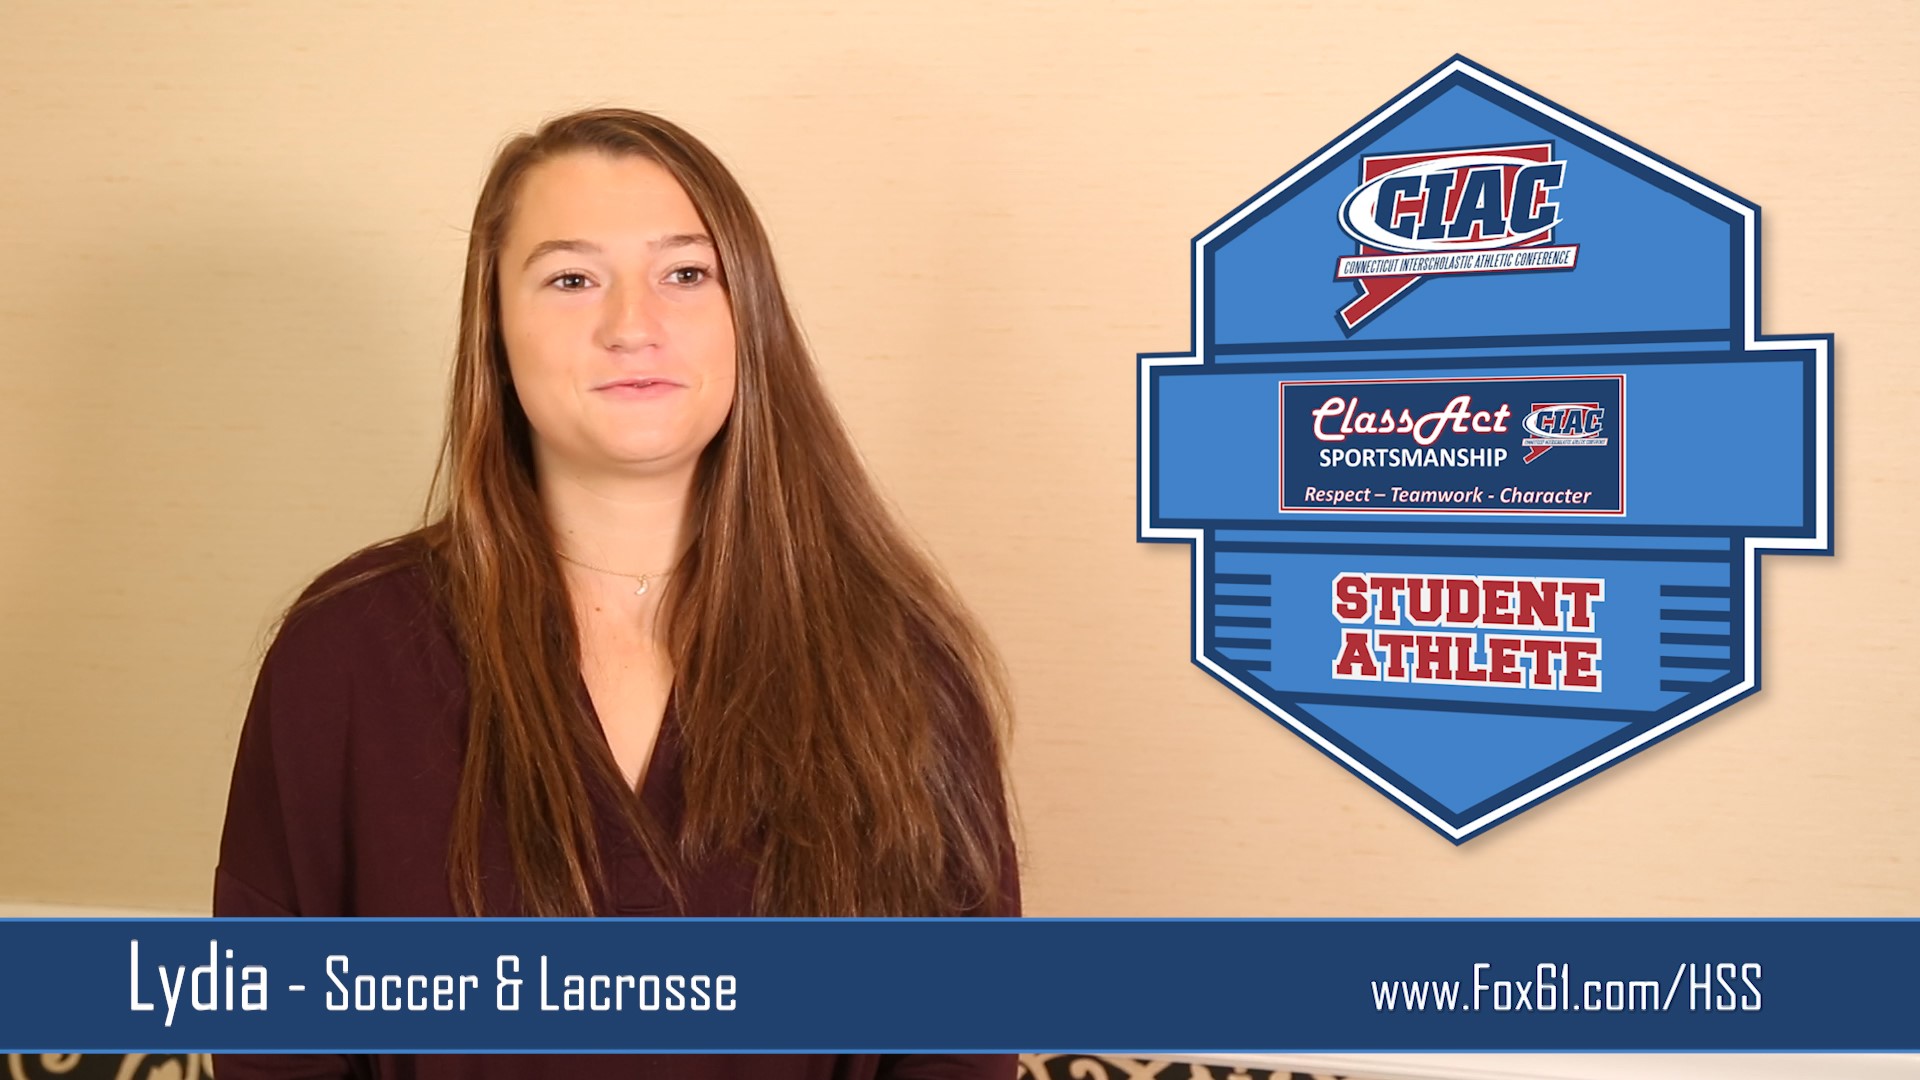 Lydia explains what being a class act athlete means to her.